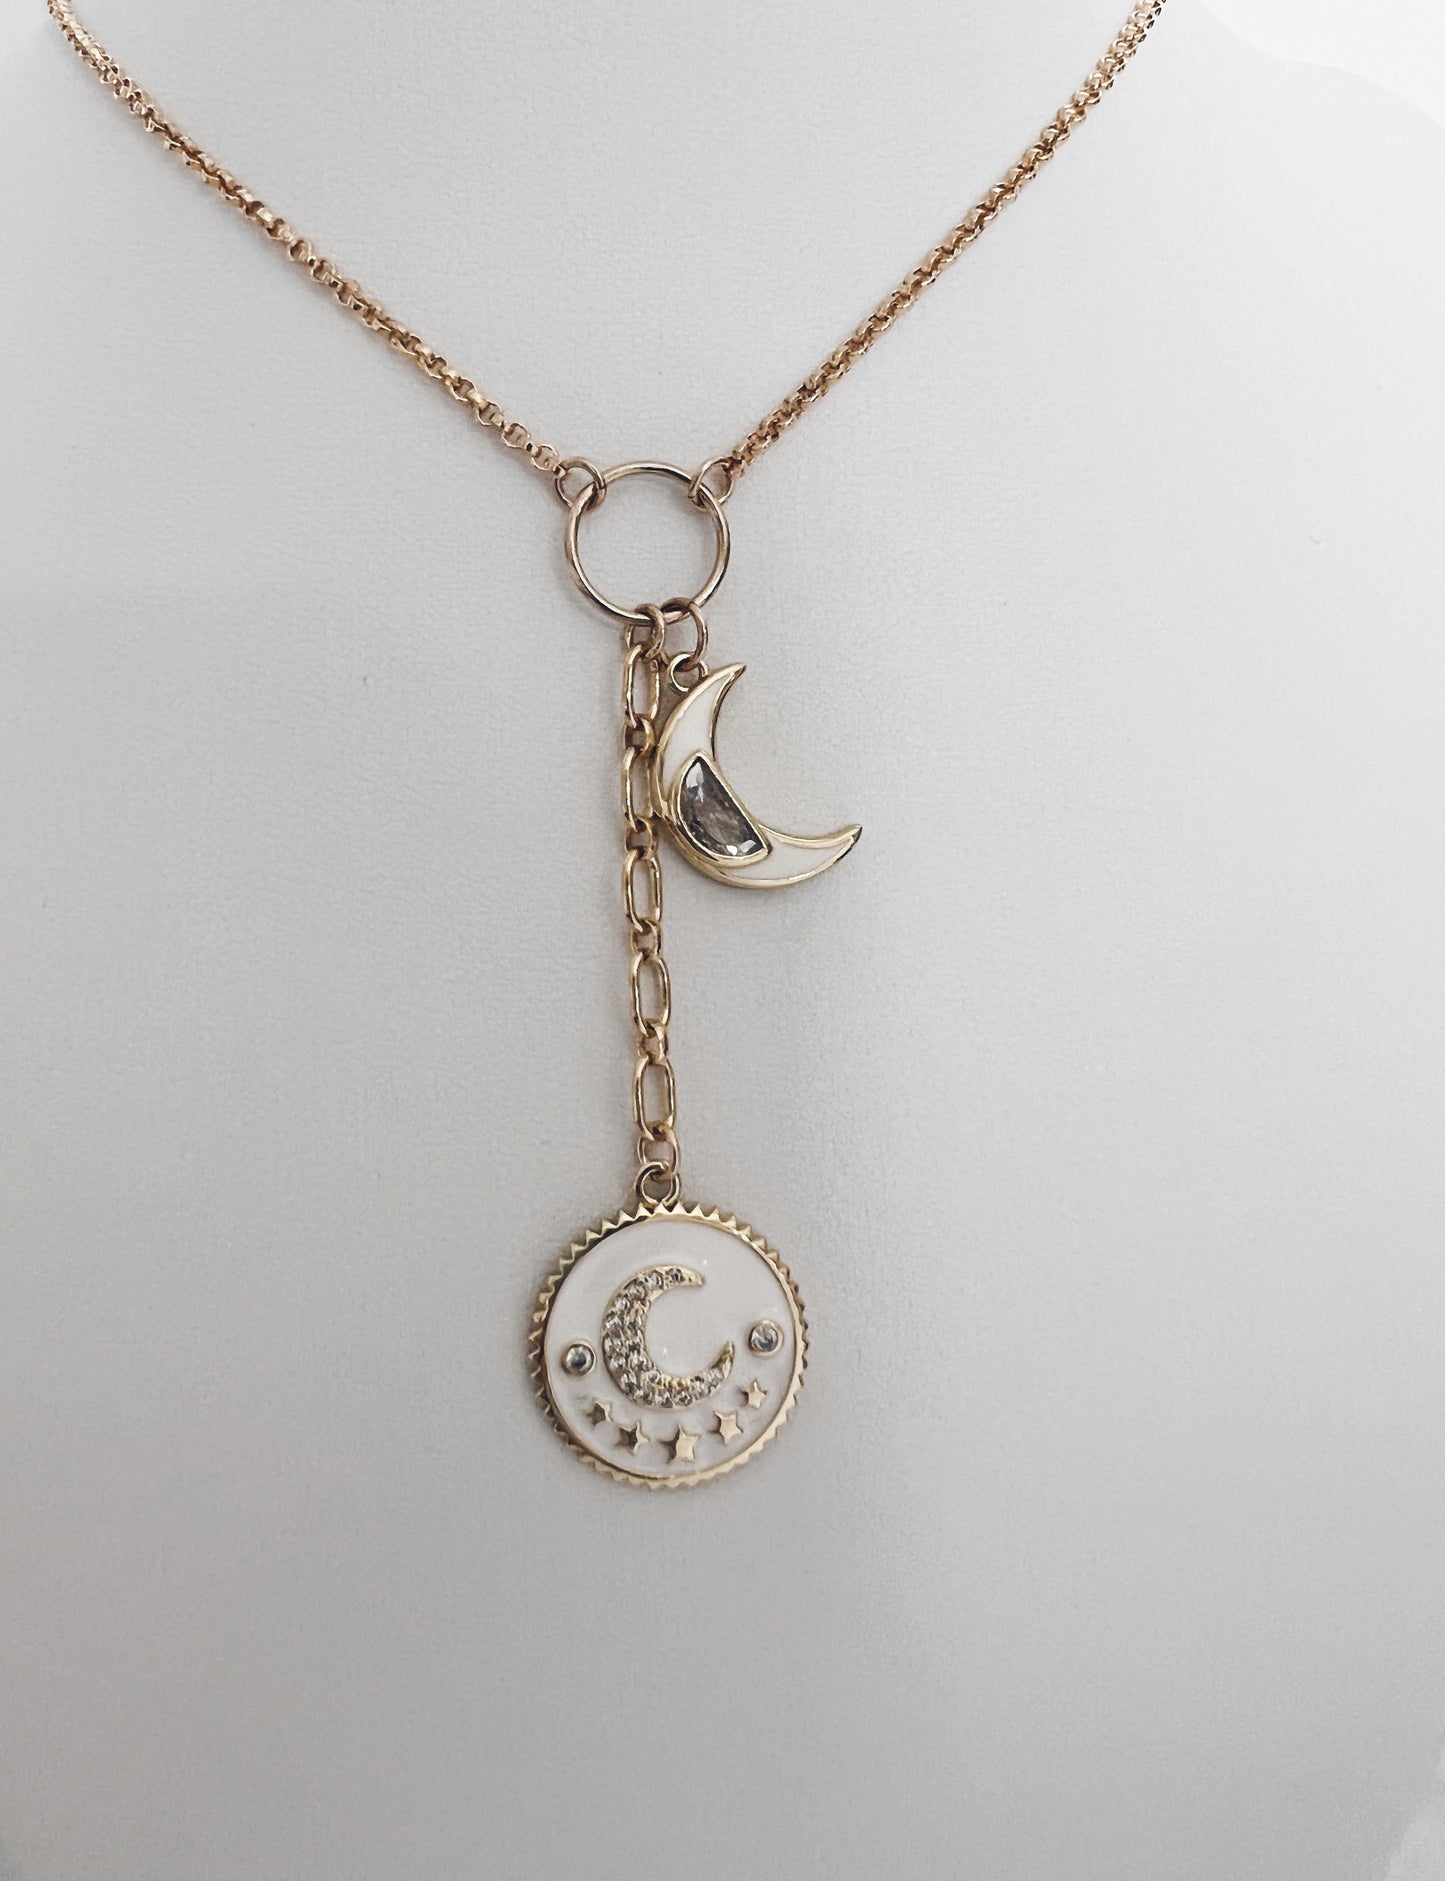 The New Moon Lariat Necklace